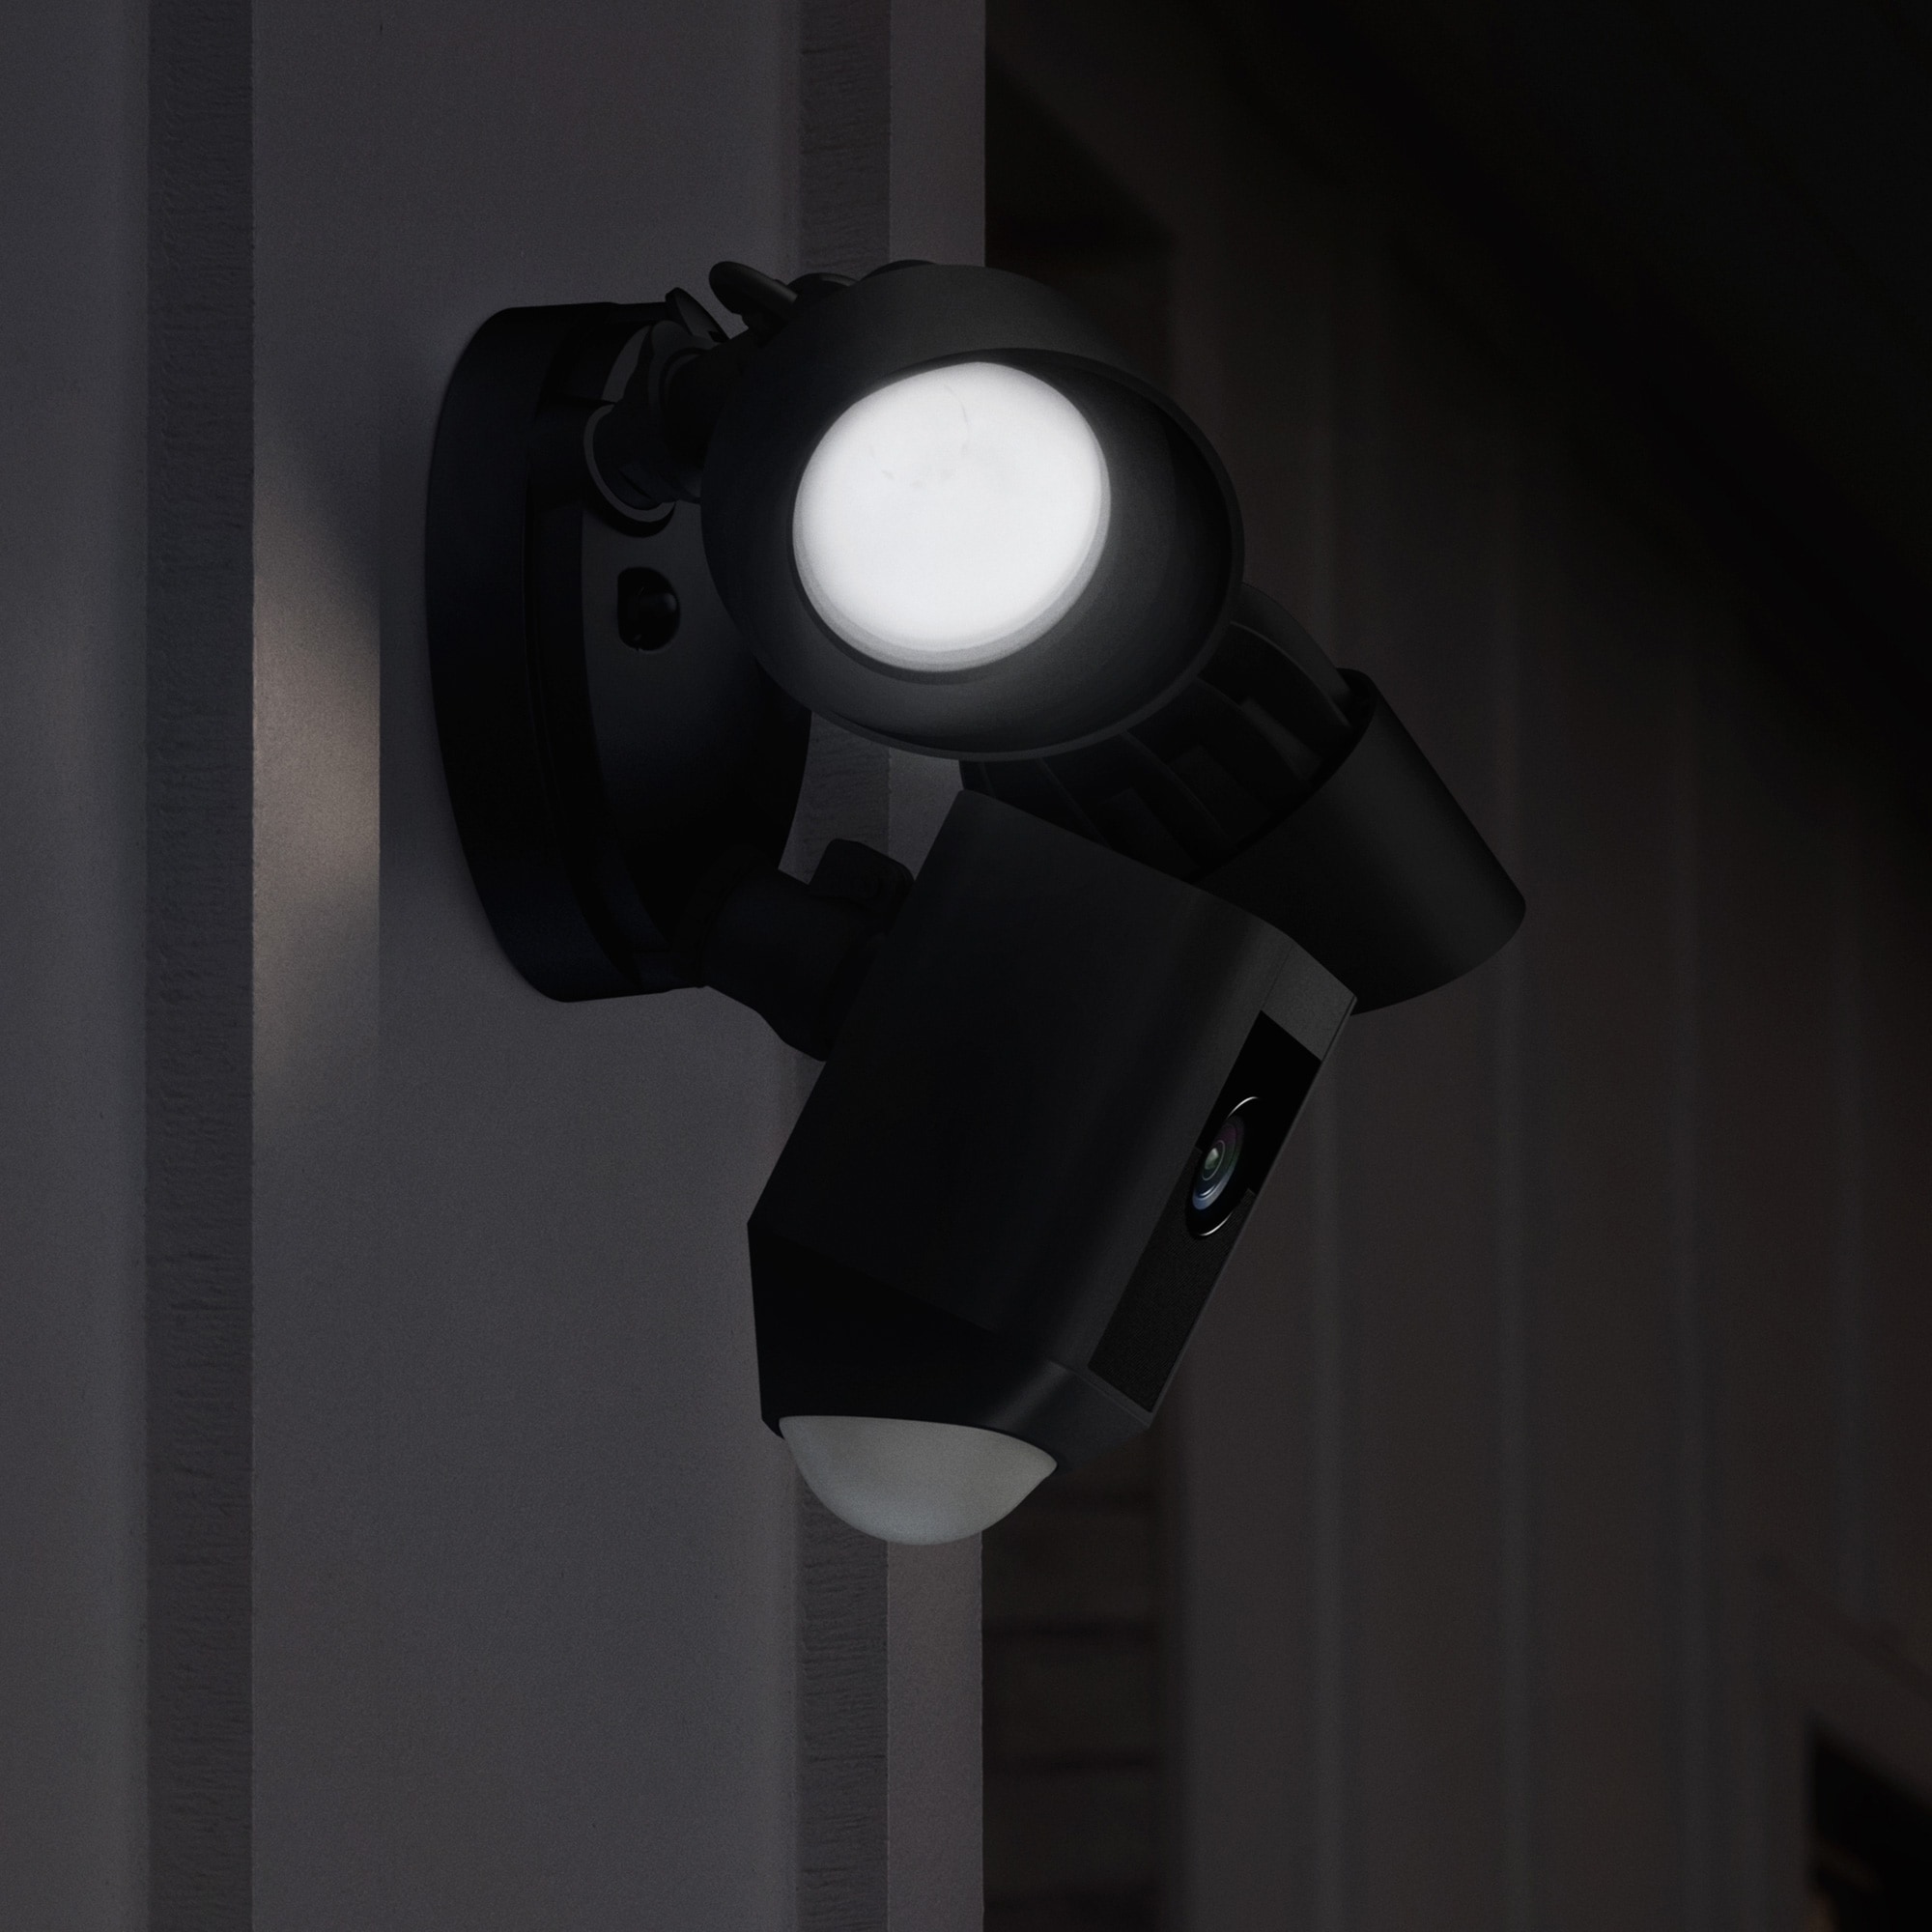 Ring Floodlight Cam - Hardwired Outdoor Smart Security Camera with